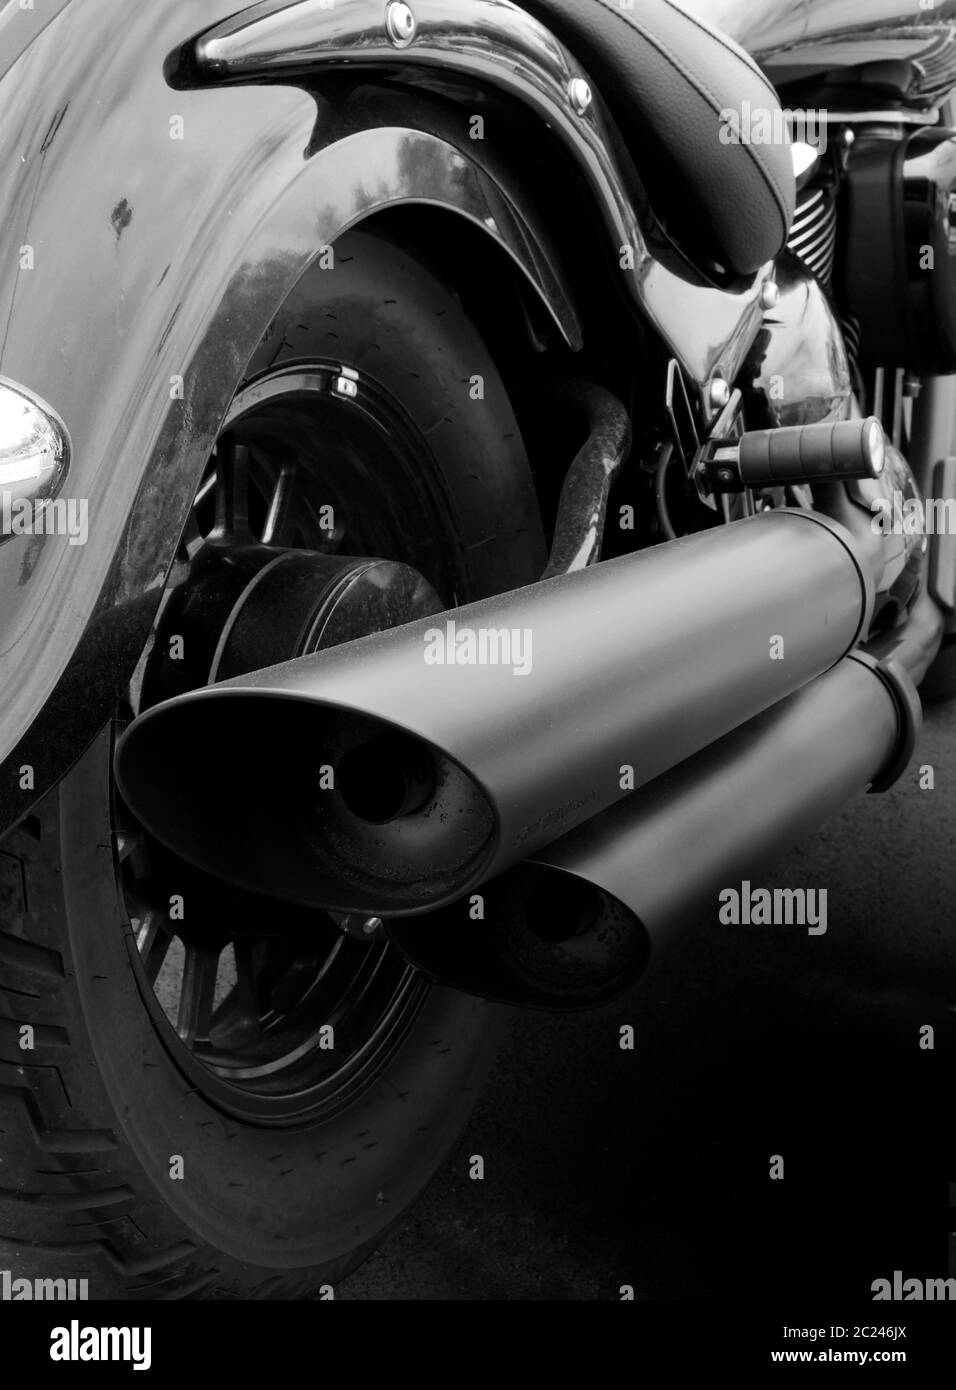 monochrome close up of the back of a vintage motorcycle with rear wheel mudguard and wide exhaust pipes Stock Photo